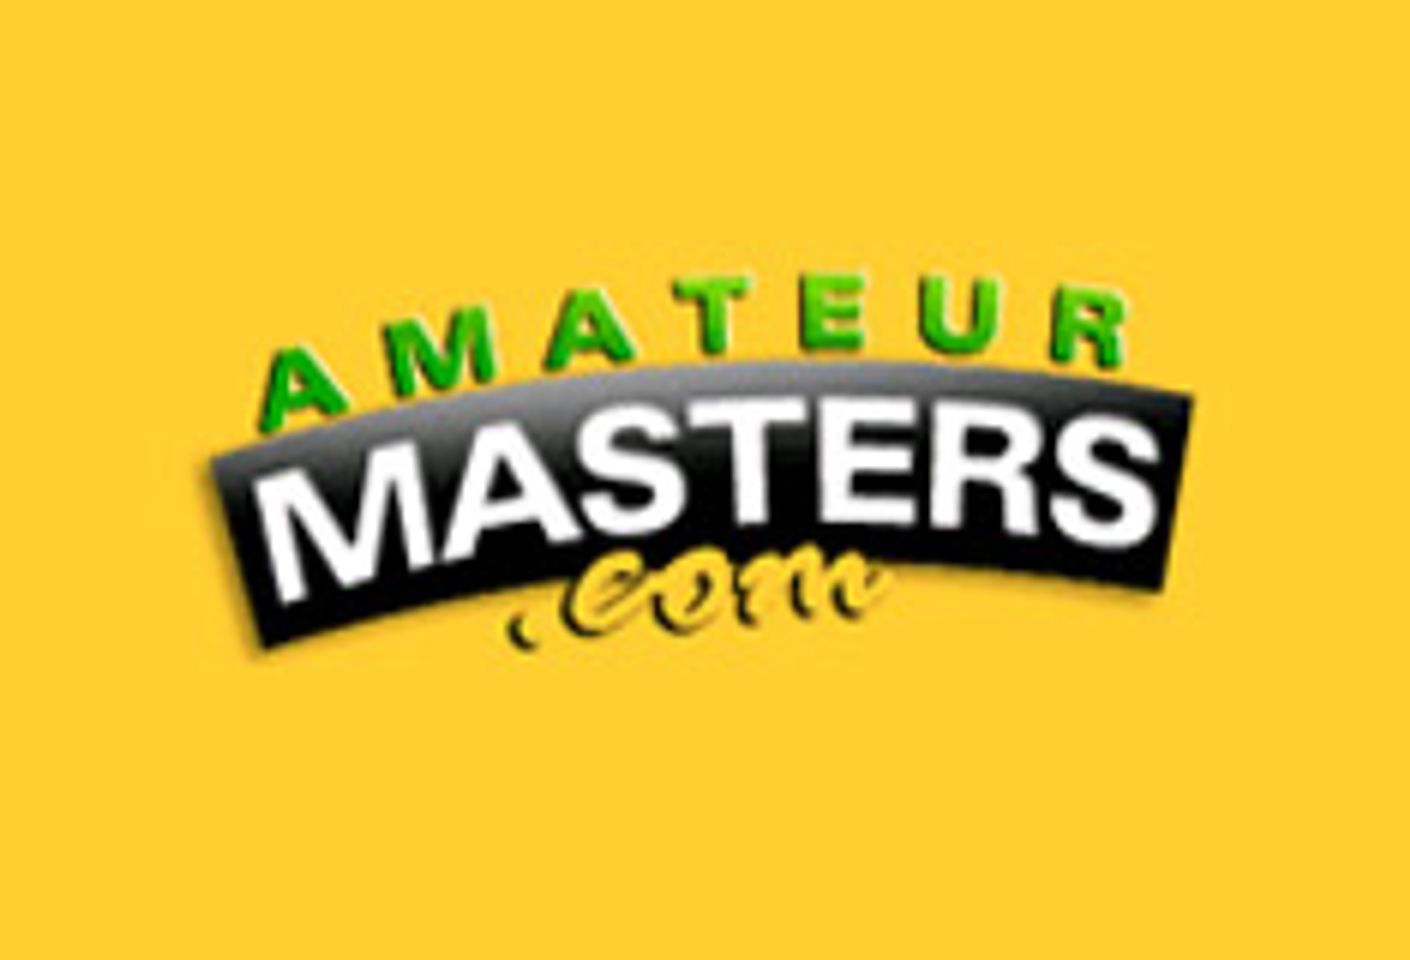 AmateurMasters.com Re-Launches Resources V.2